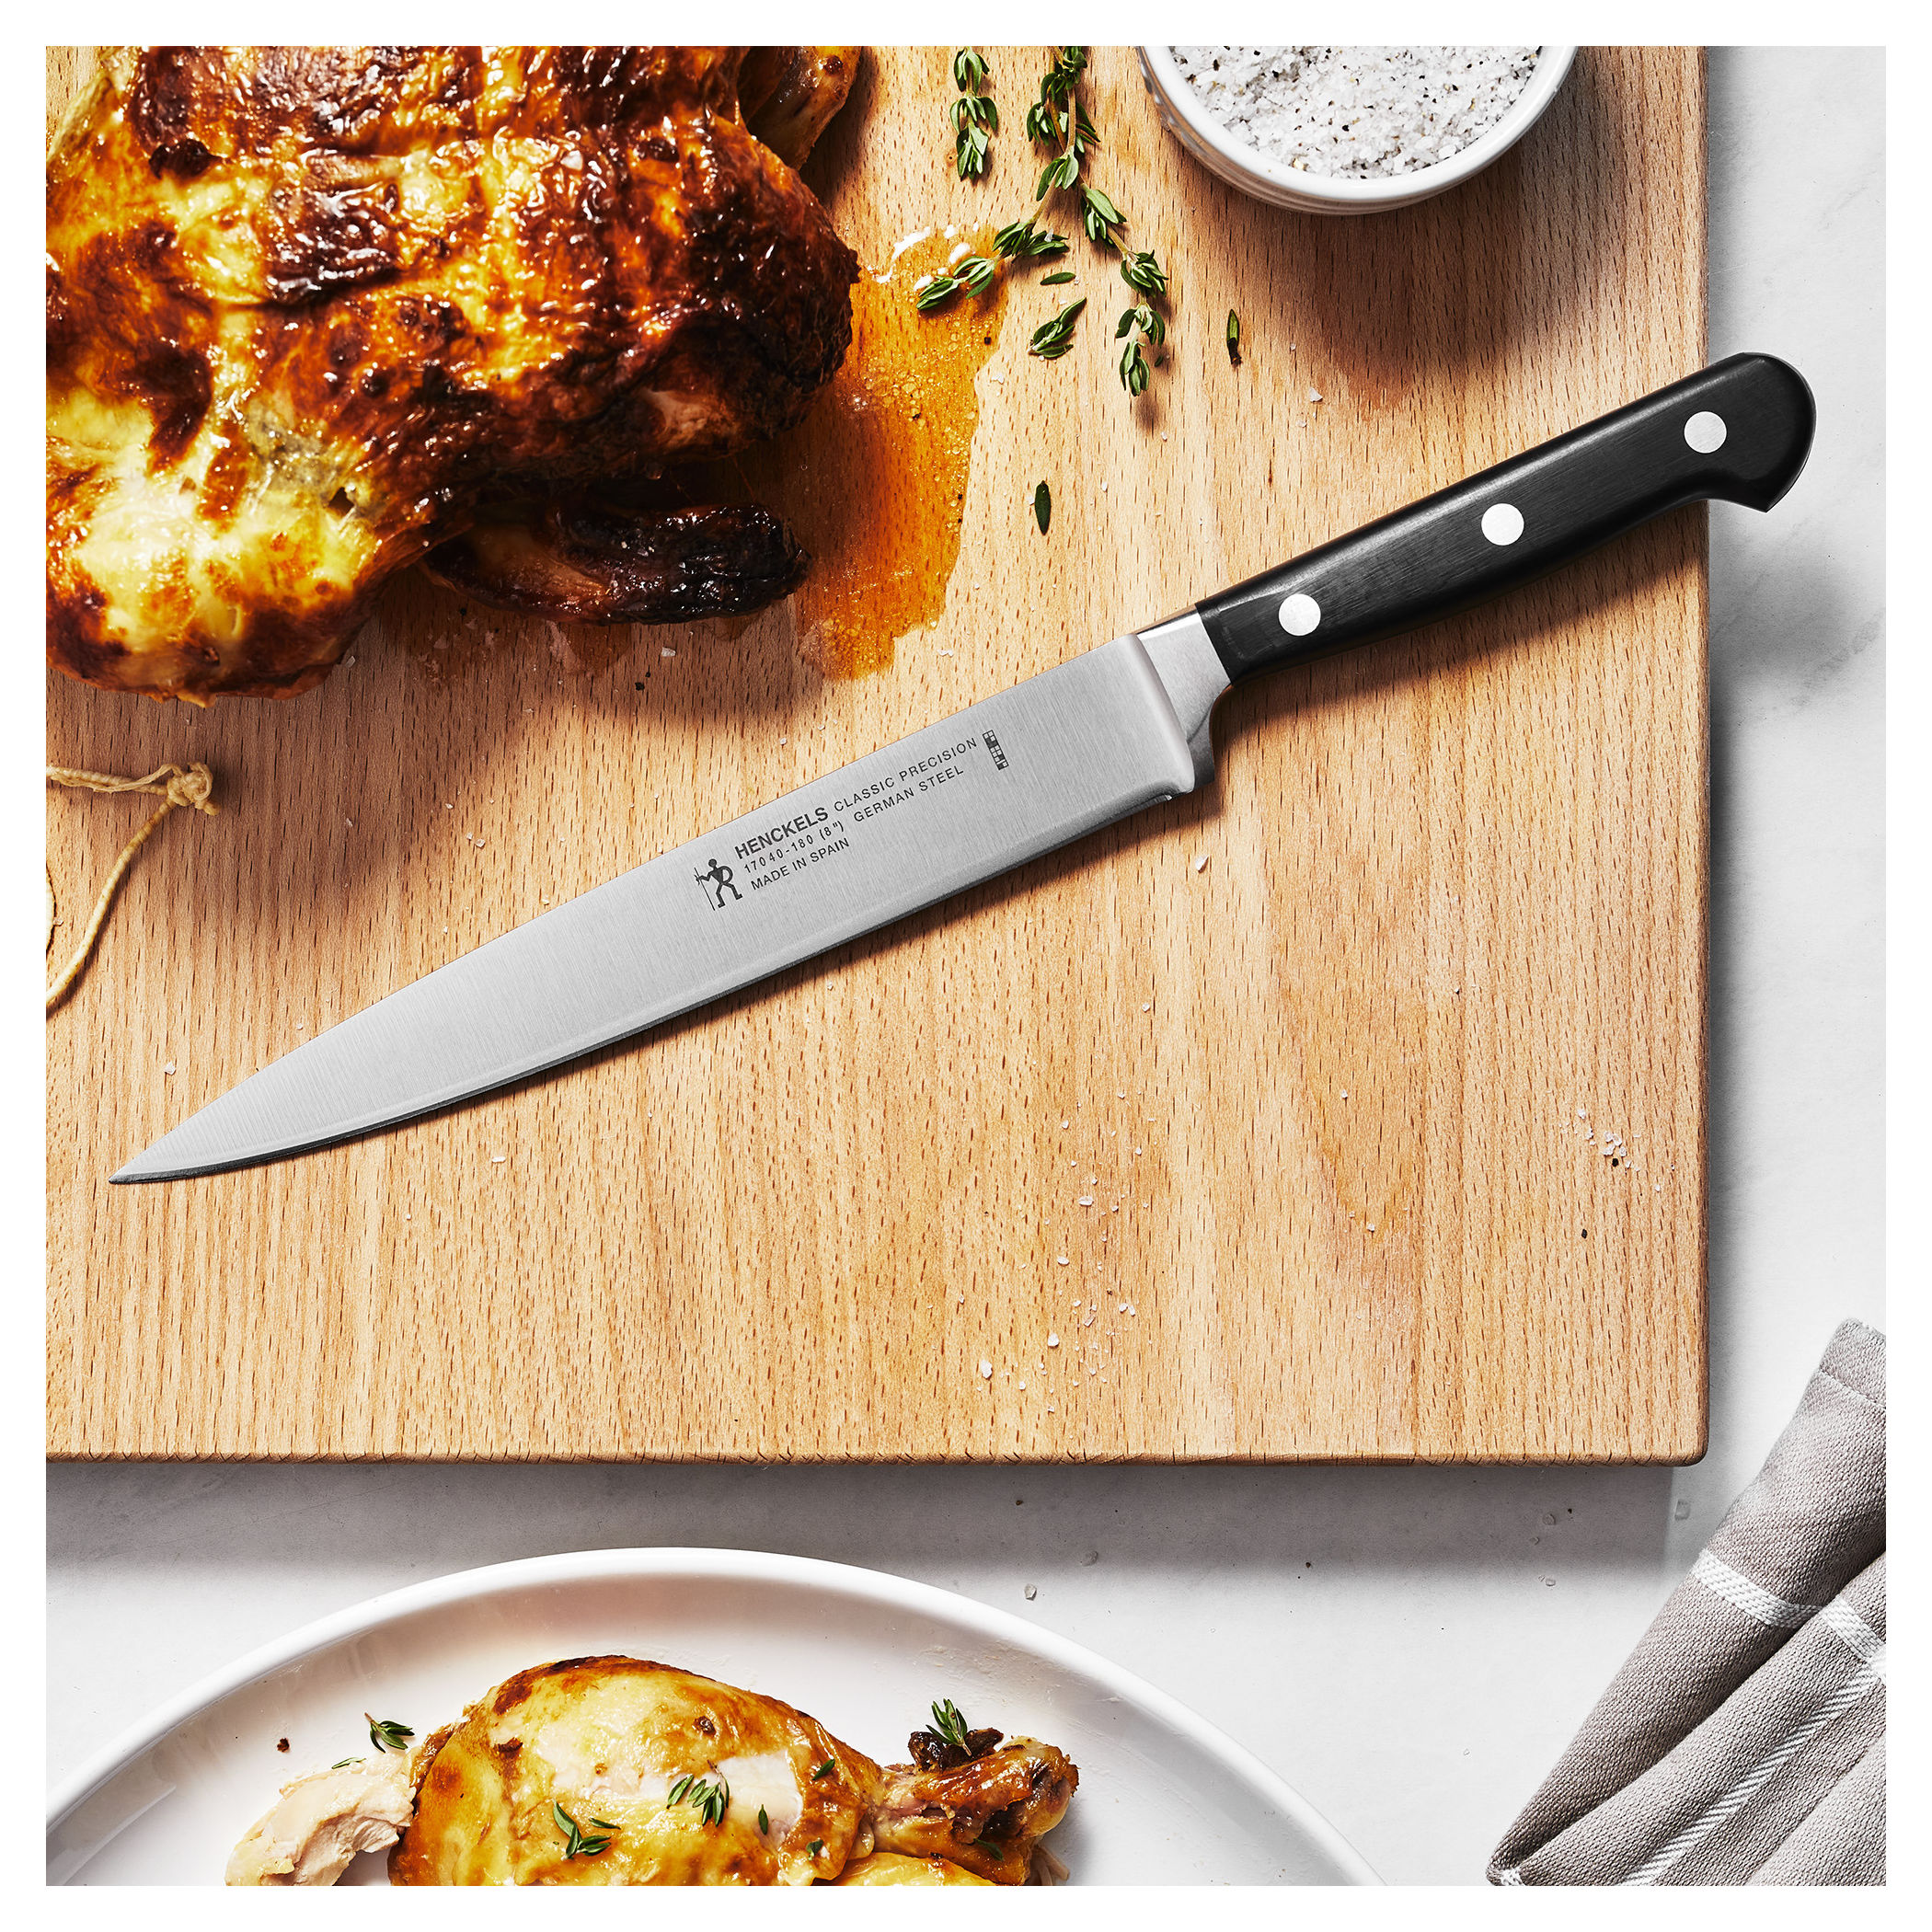 Henckels Classic Precision 8-inch, Slicing/Carving Knife